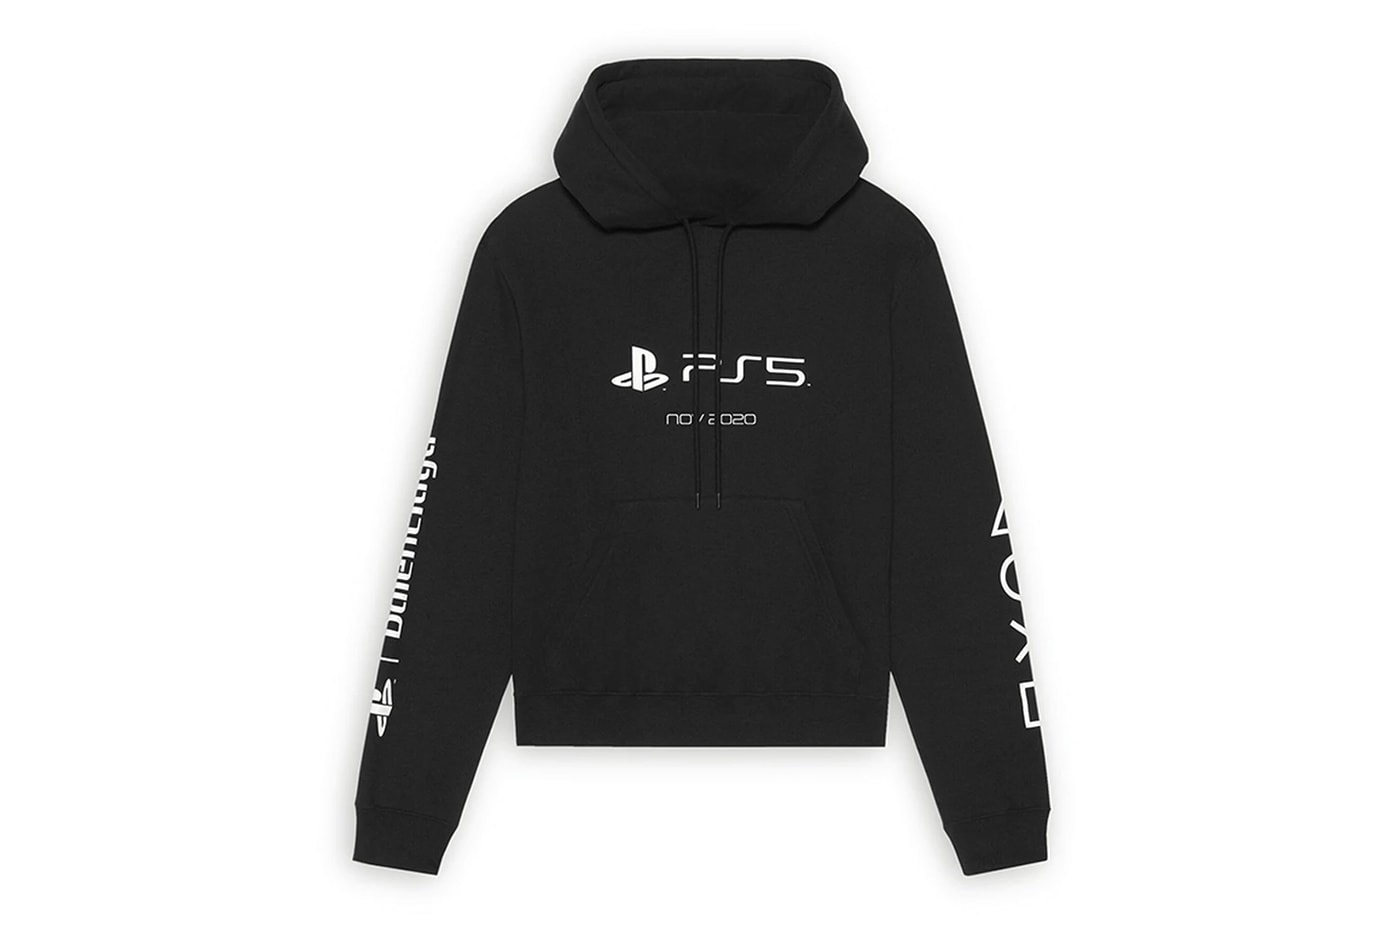 Sony PlayStation 5 Balenciaga Capsule Release T shirt Hoodie Price 